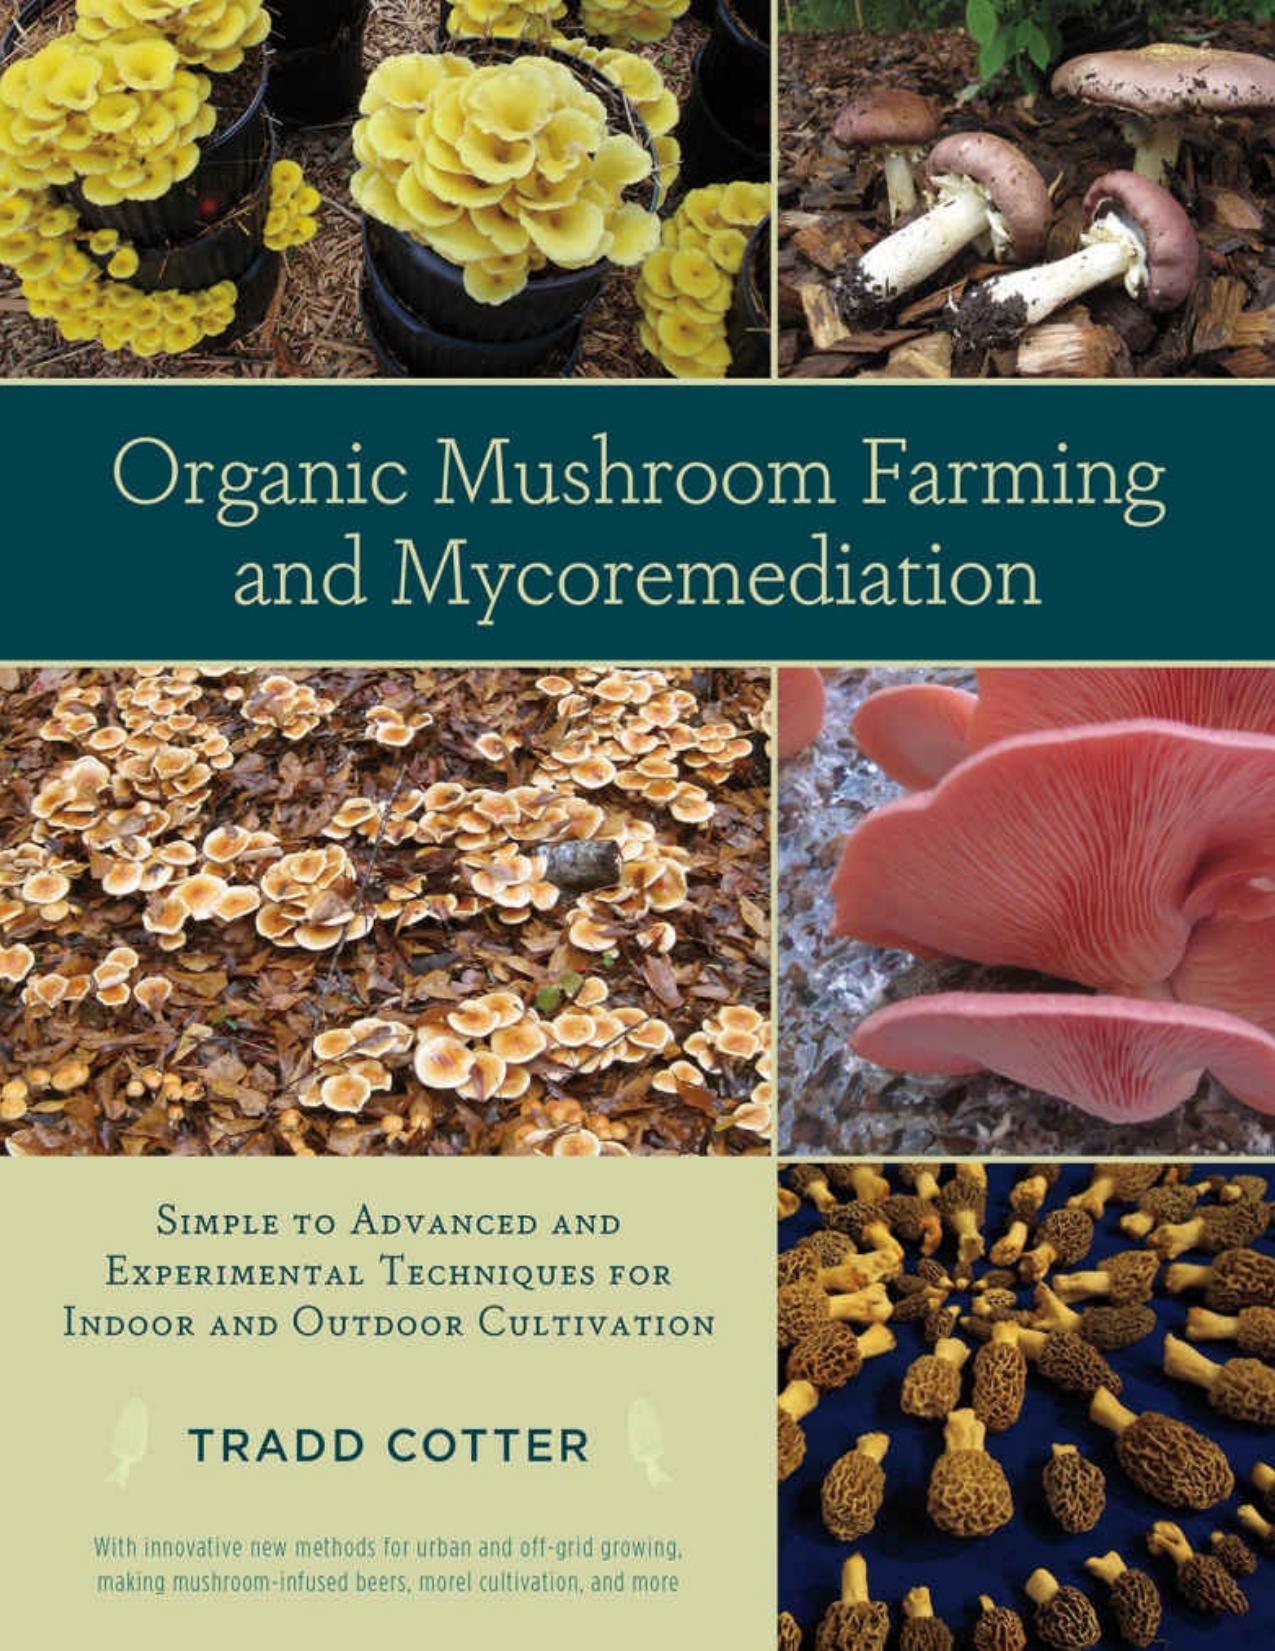 Organic Mushroom Farming and Mycoremediation: Simple to Advanced and Experimental Techniques for Indoor and Outdoor Cultivation by Tradd Cotter